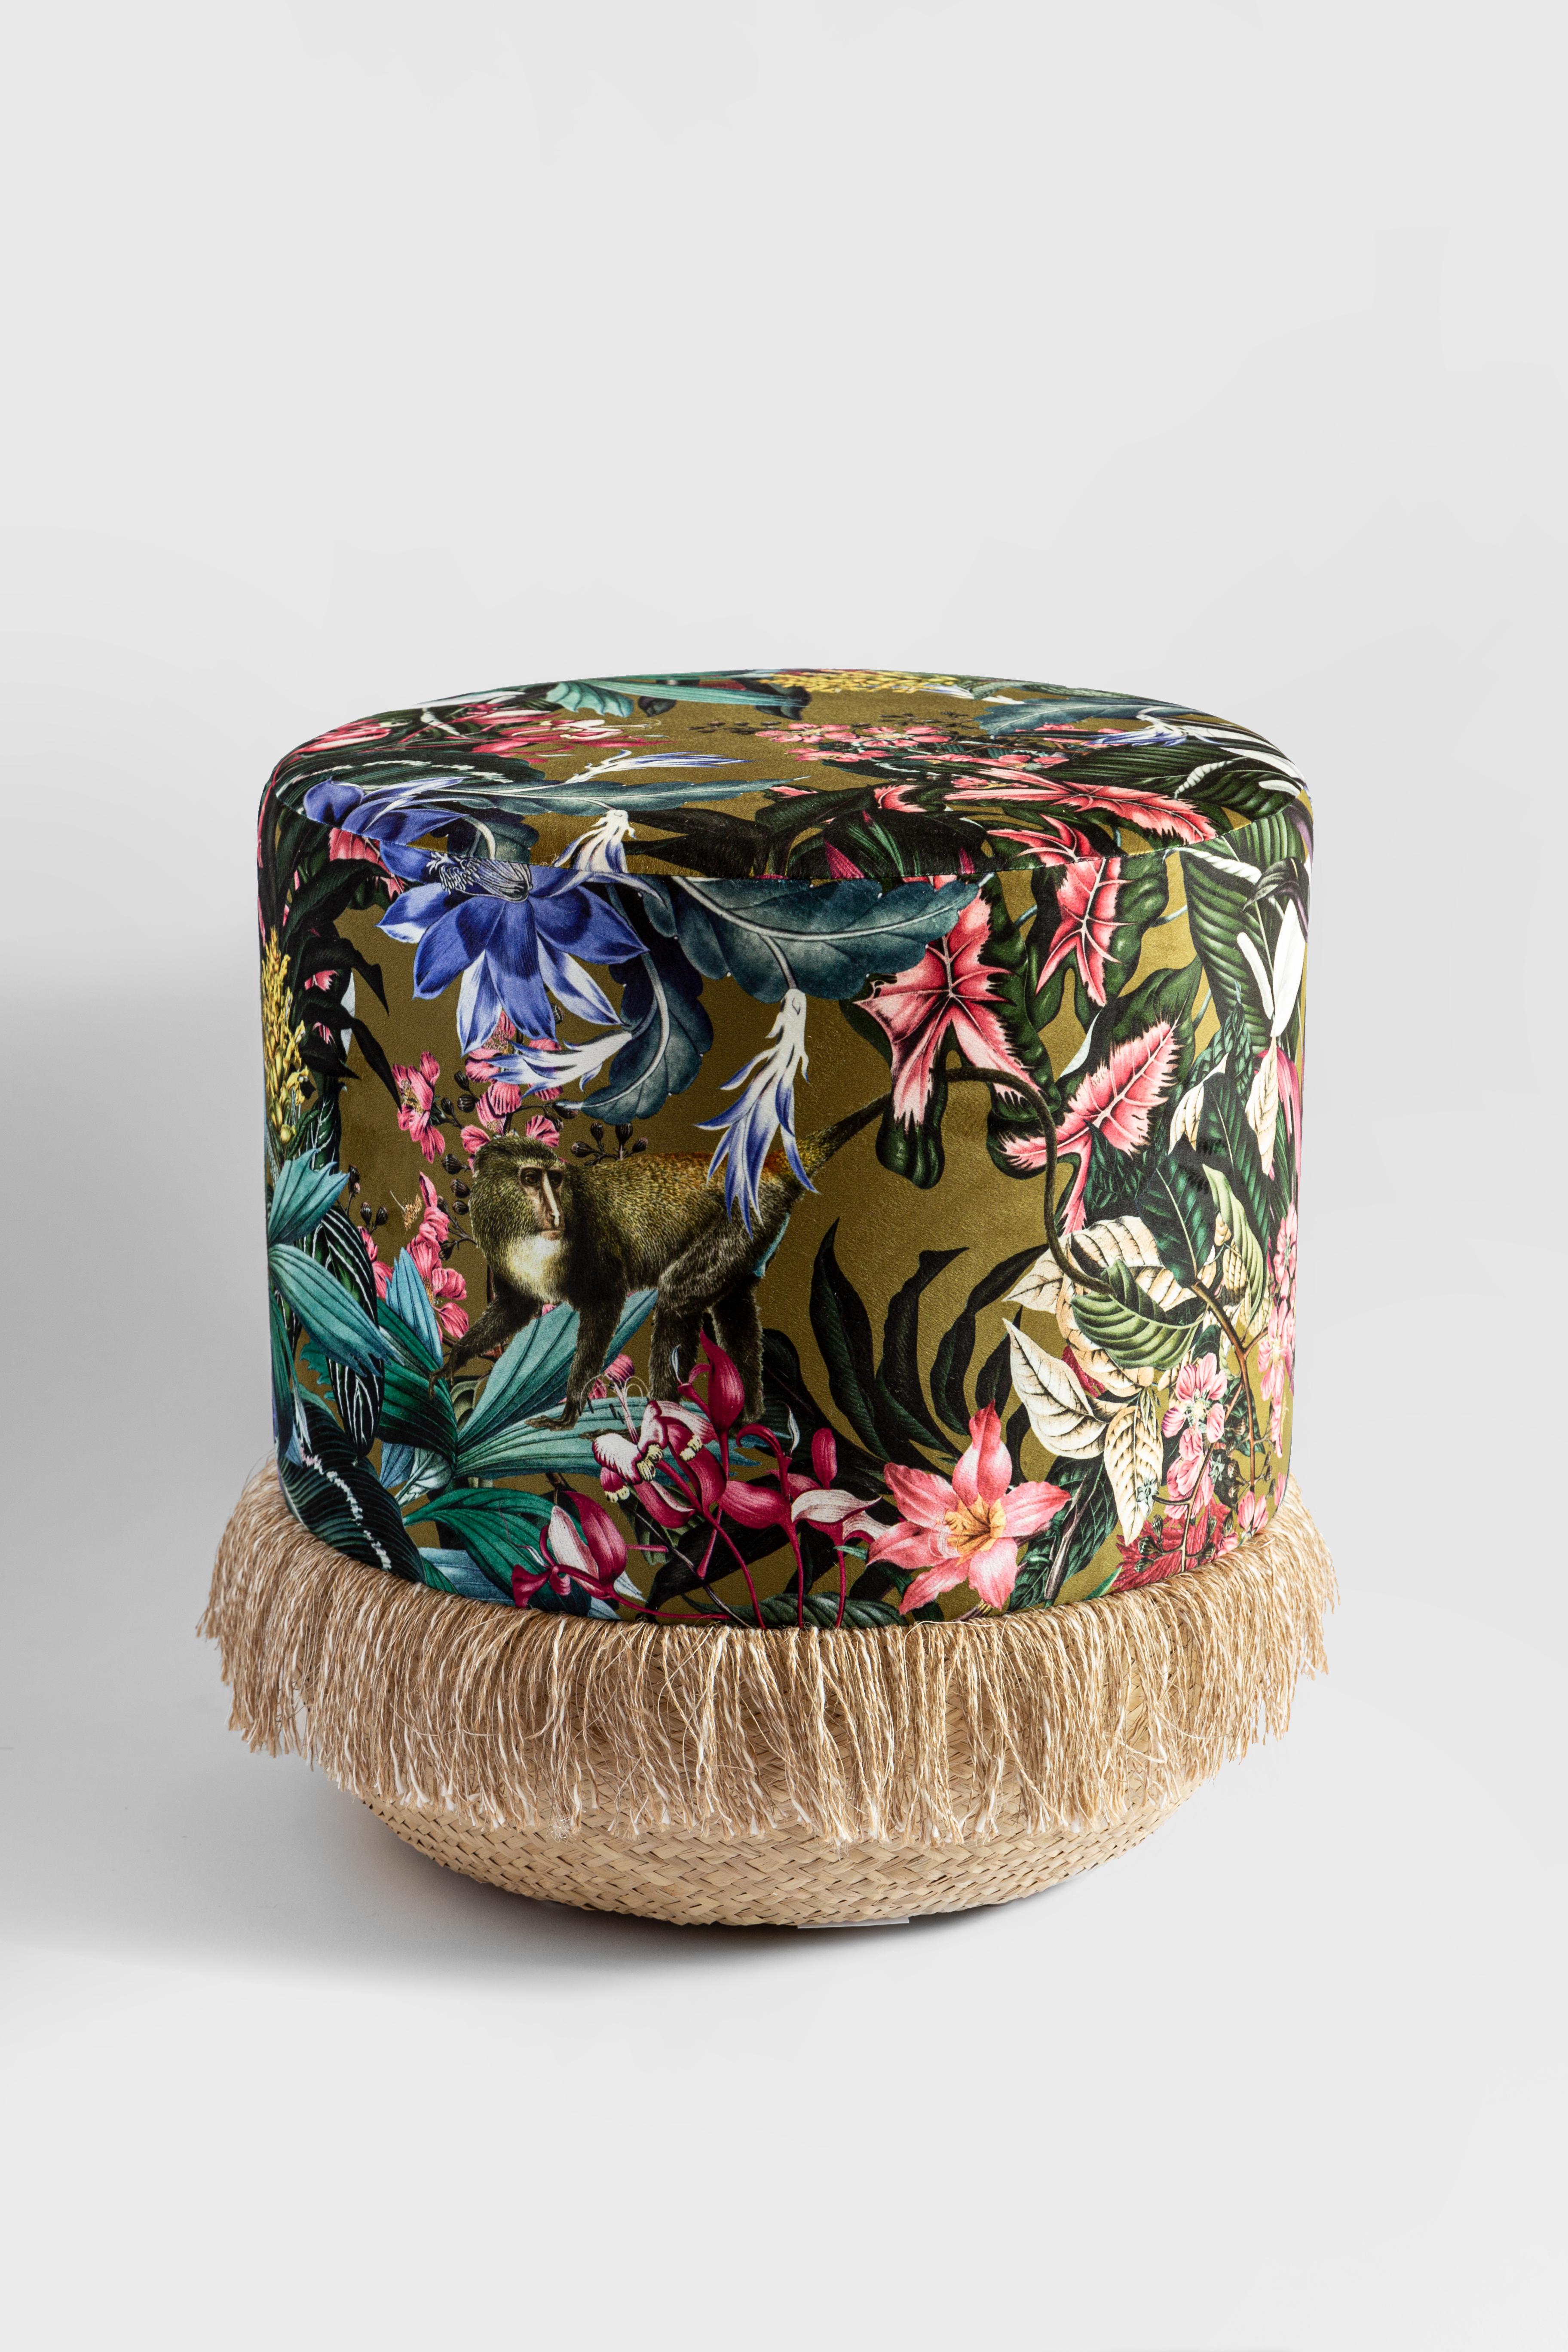 Pouf handmade by Italian expert craftsmen. High quality straw base and printed velvet covering. 
The decoration of this model is composed of tropical flowers and large leaves, where a wild cheetah and monkey are hidden.